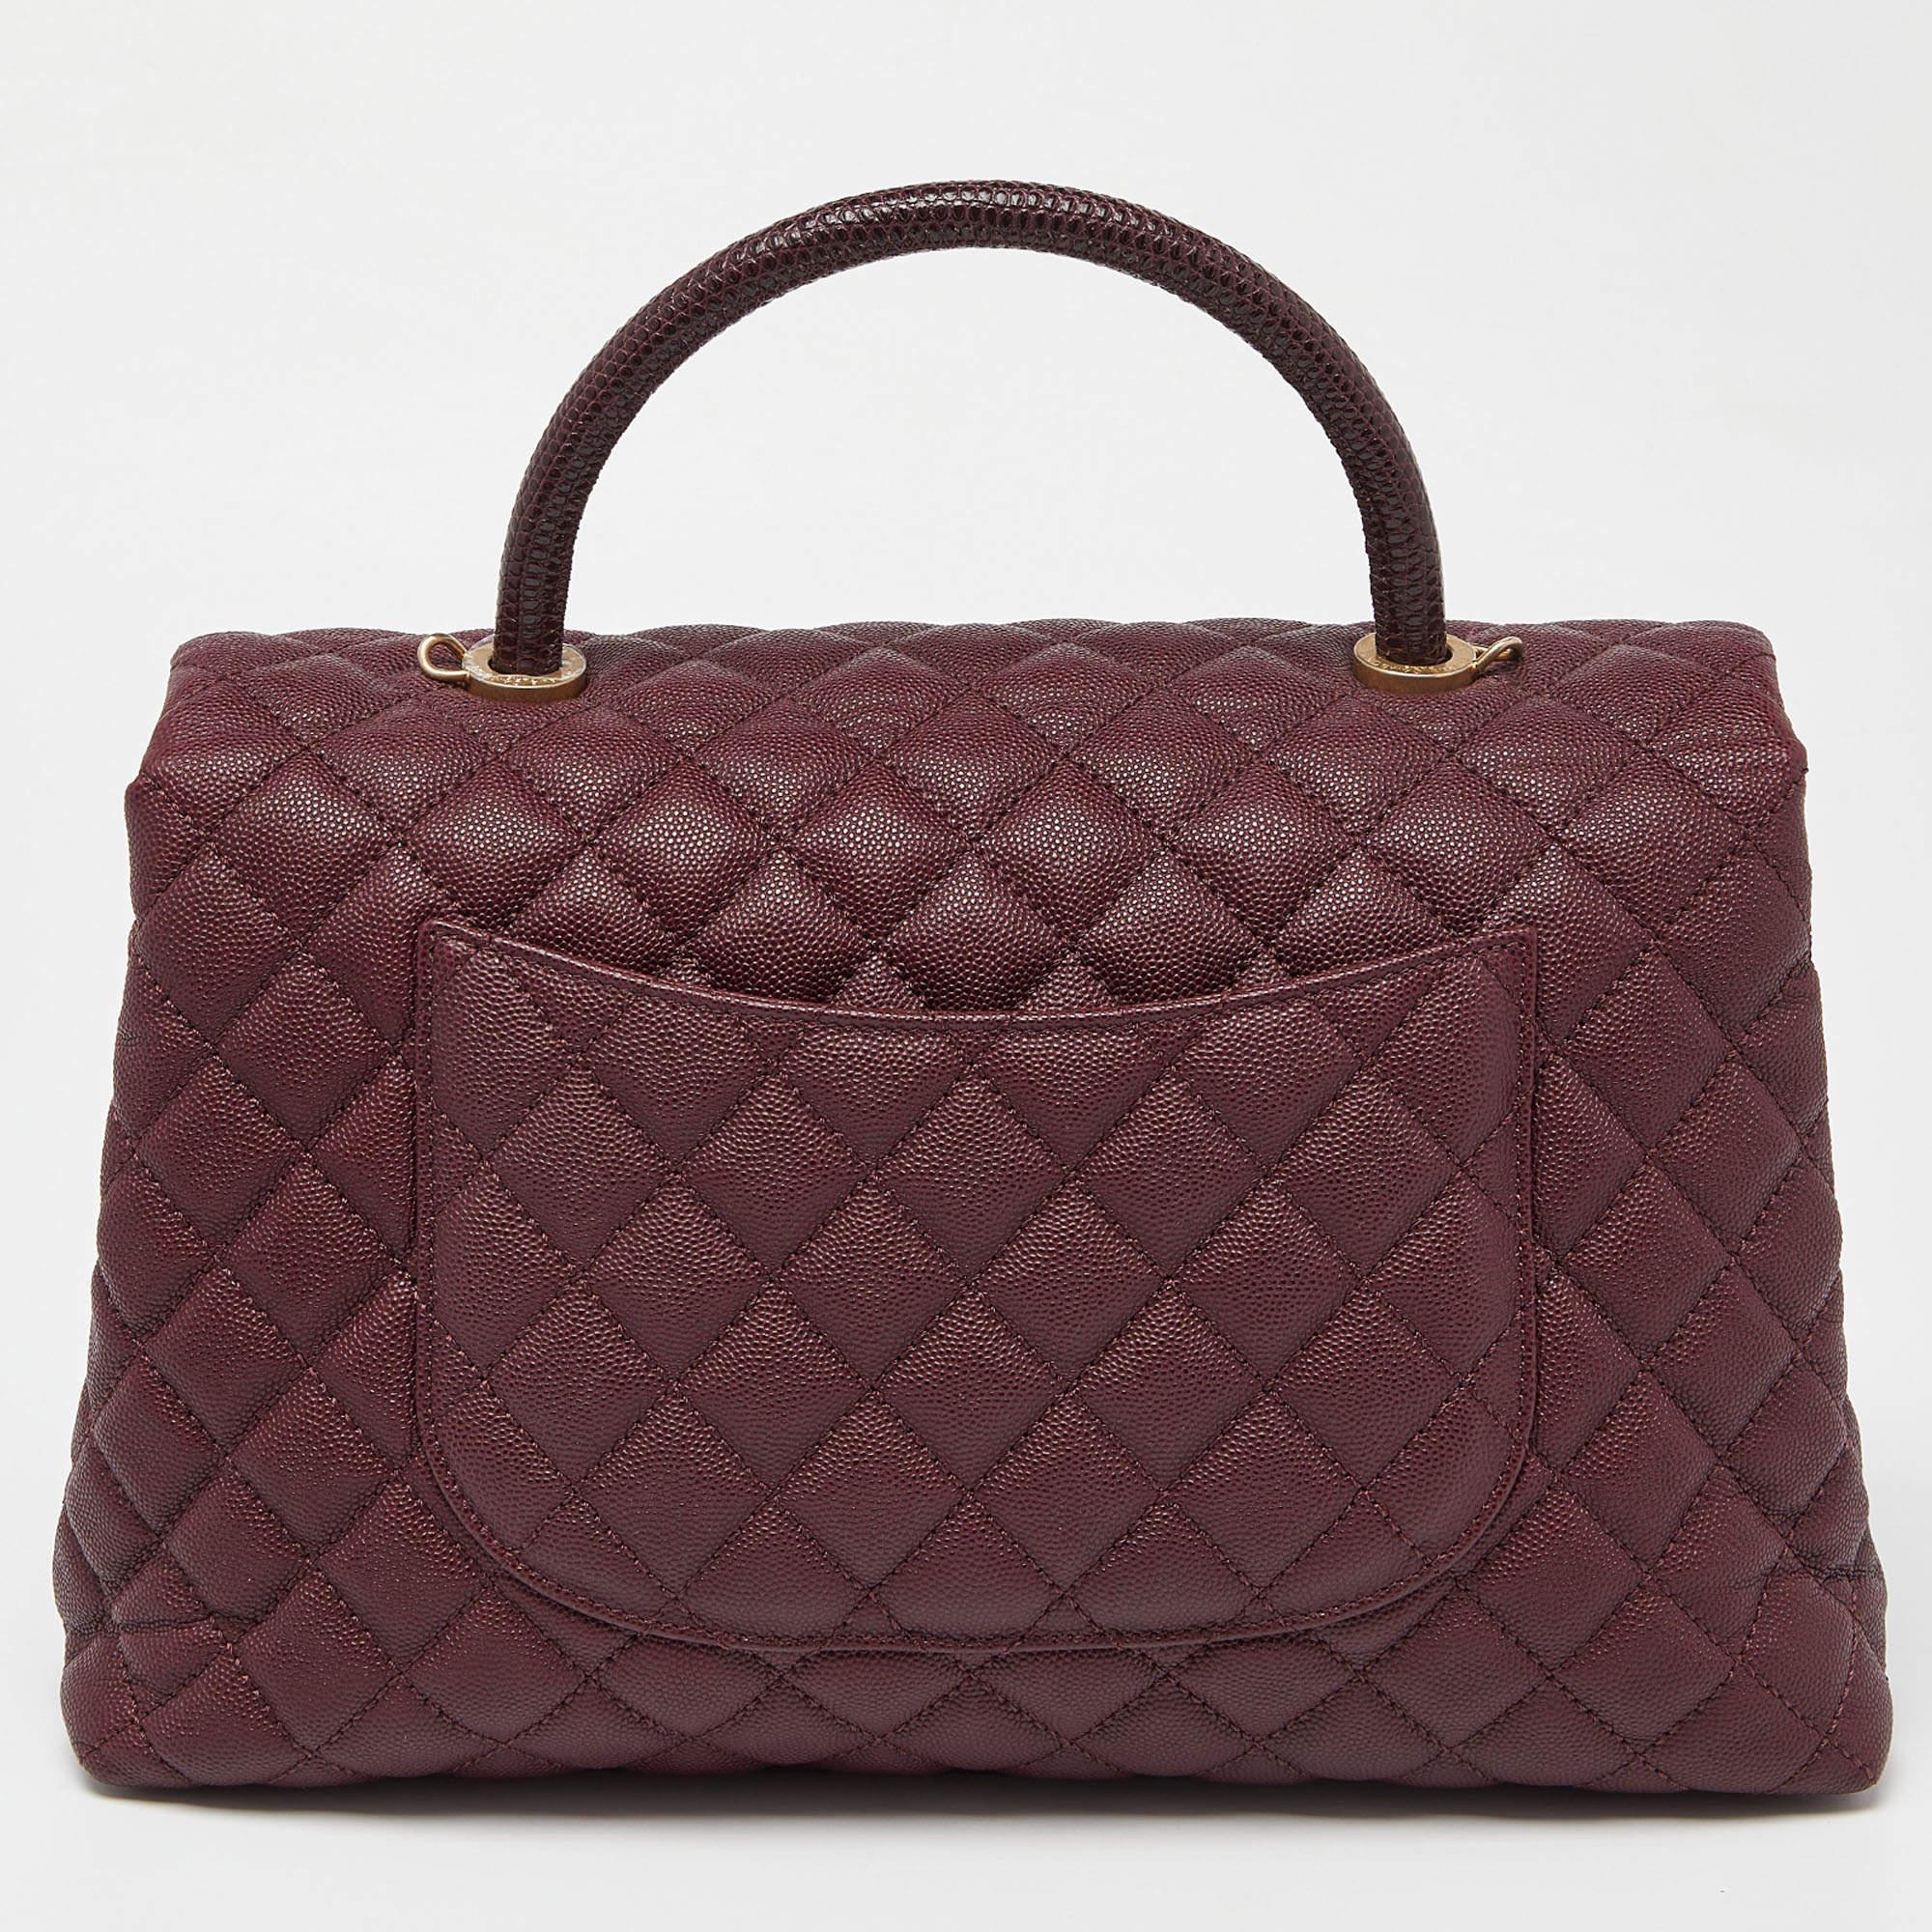 Chanel Burgundy Quilted Caviar Leather and Lizard Medium Coco Top Handle Bag For Sale 5